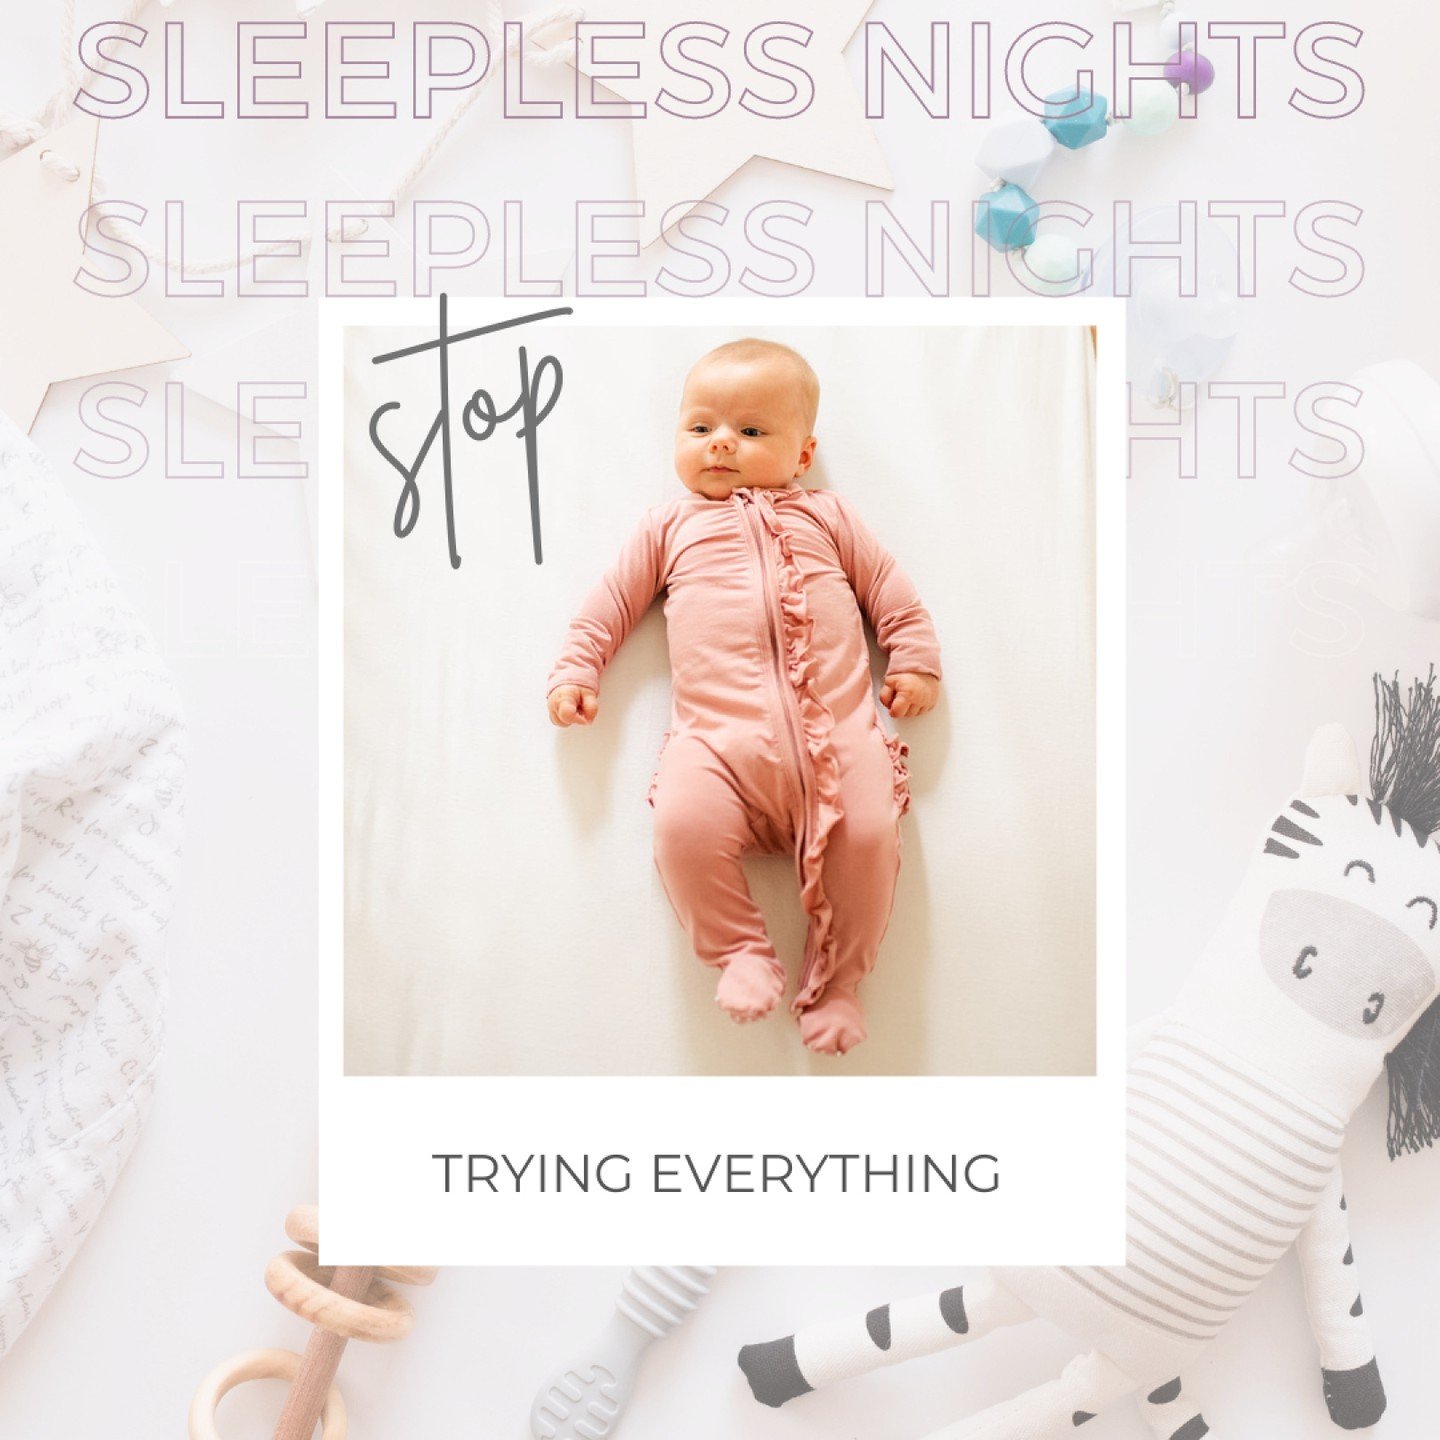 👶🌙 I understand firsthand the struggle of navigating sleepless nights and short naps with our little ones. It's tempting to throw every idea at the situation in hopes that something will stick. However, I've found that this approach often becomes a